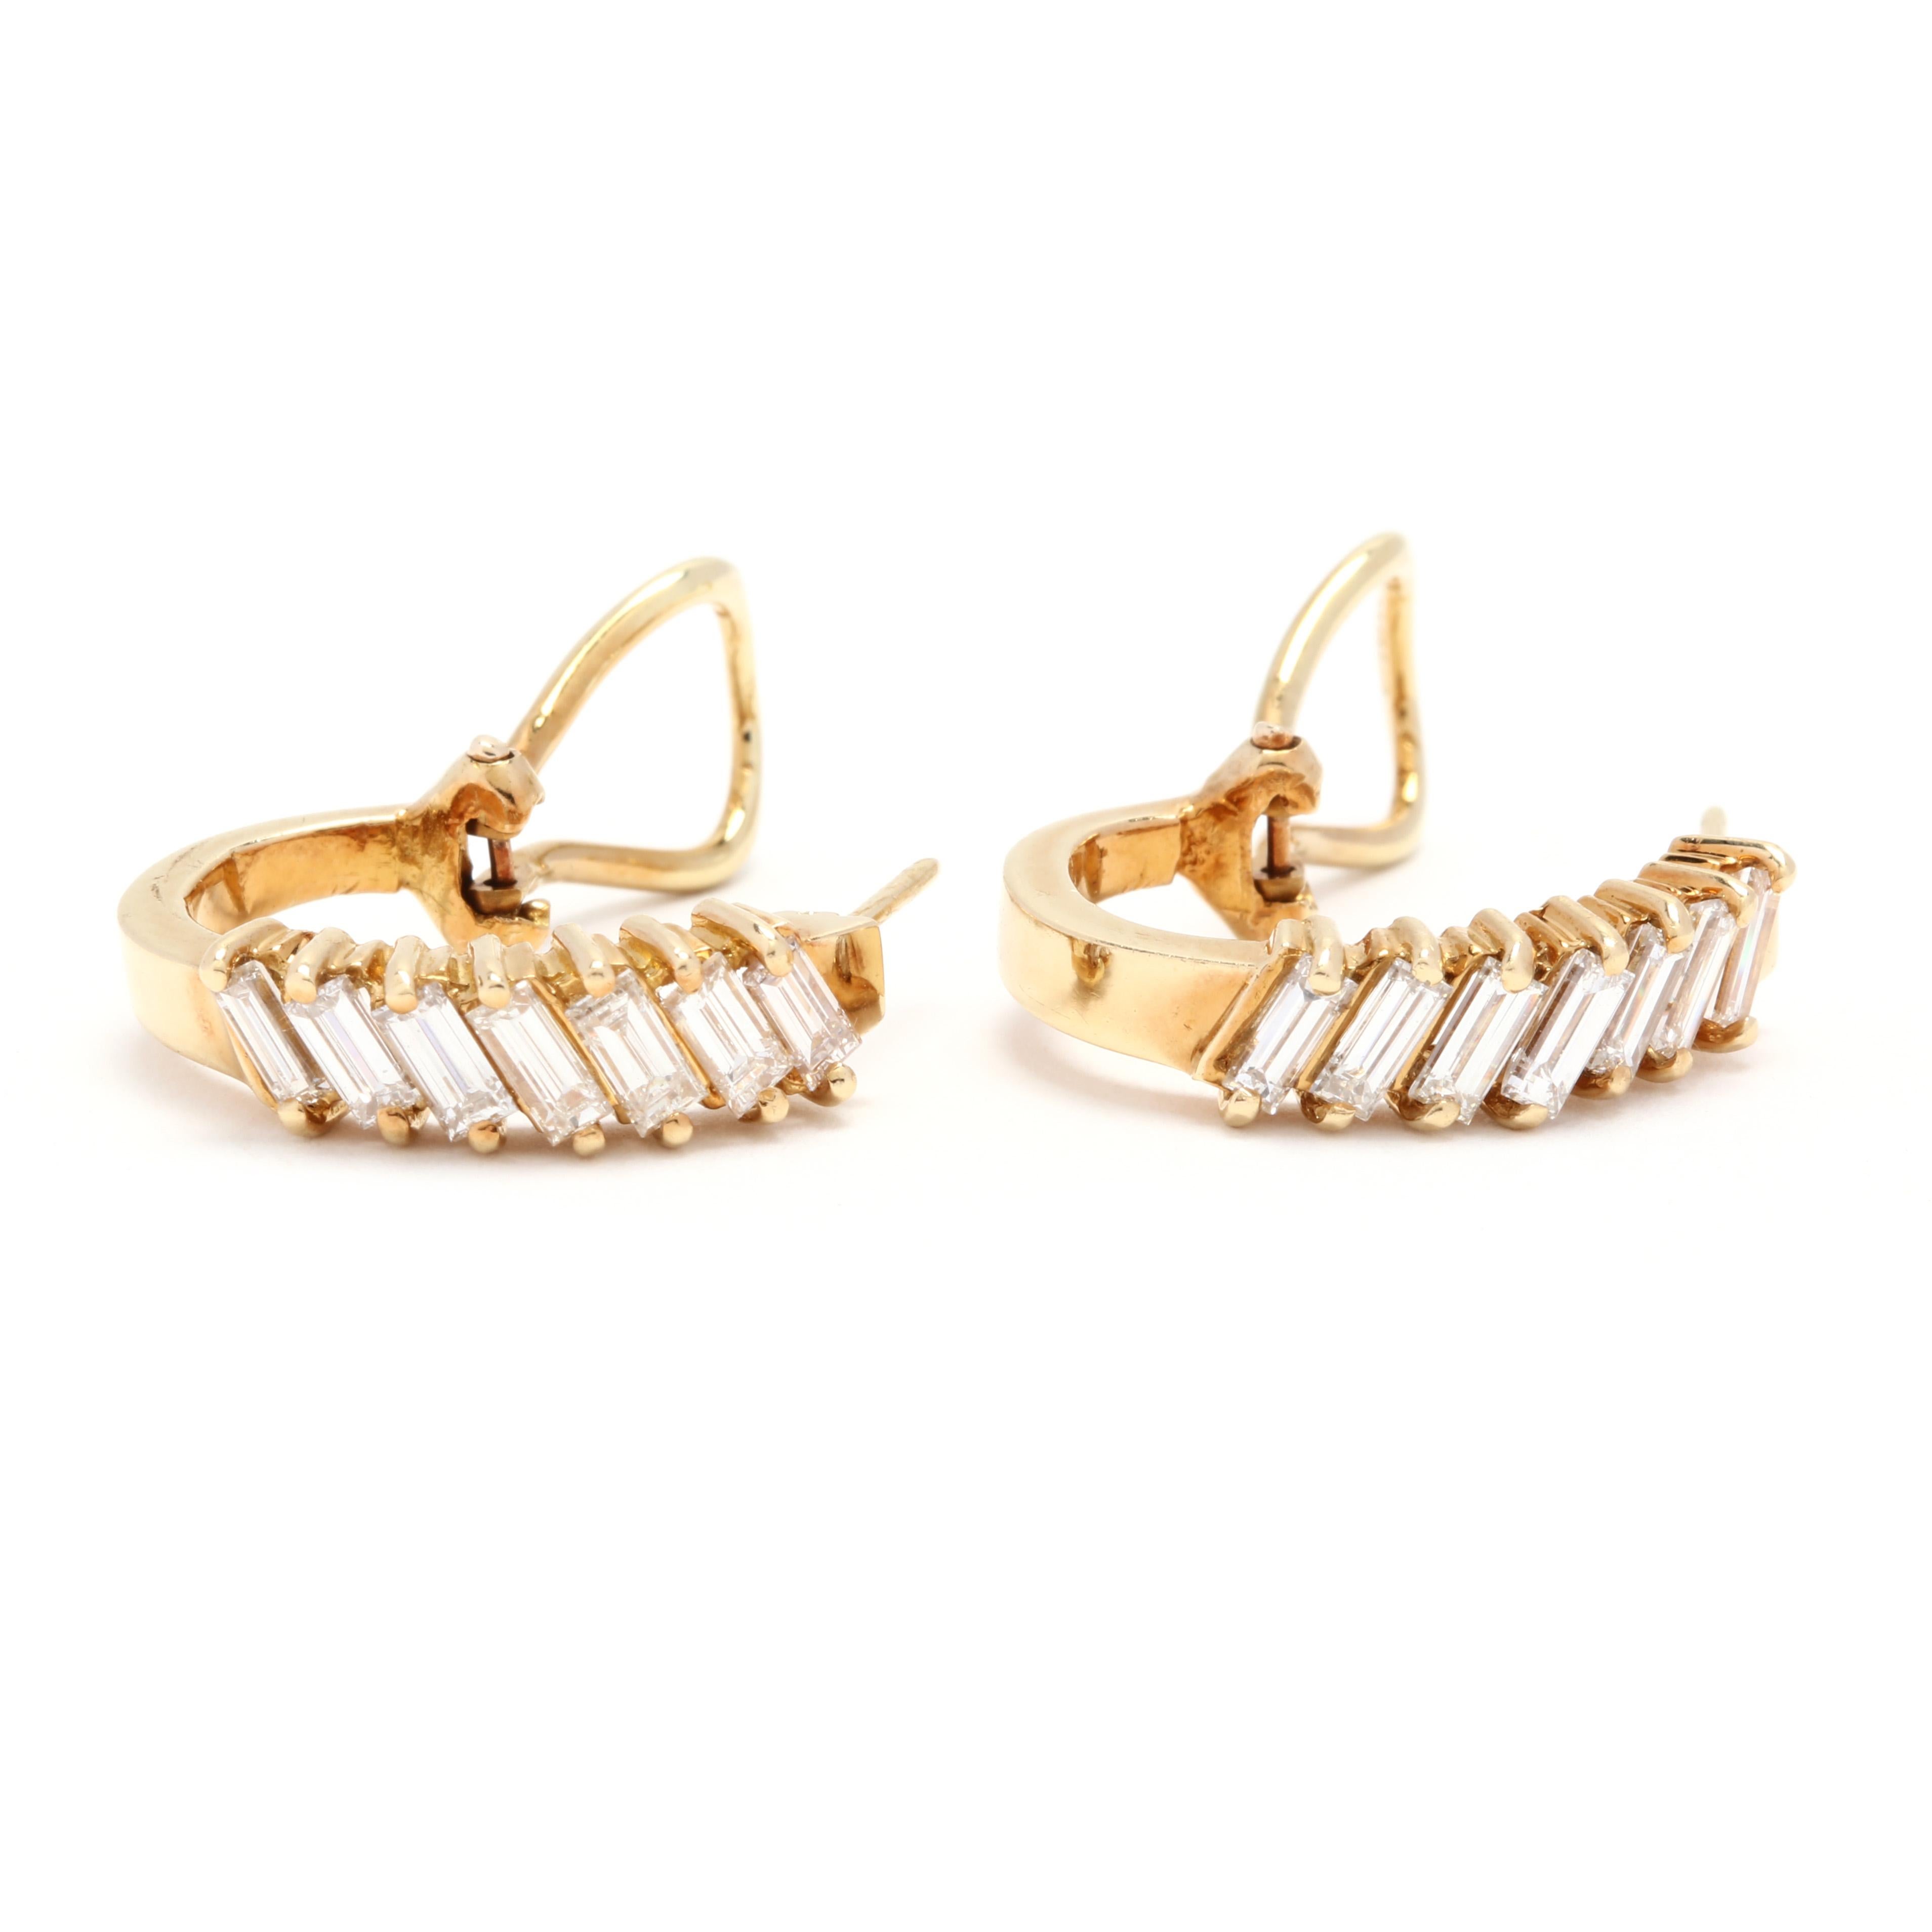 A pair of 18 karat yellow gold and baguette diamond hoop earrings. These earrings feature a J hoop design with prong set baguette cut diamonds set on an angle weighing approximately 1.84 total carats and with pierced Omega backs.

Stones:
-